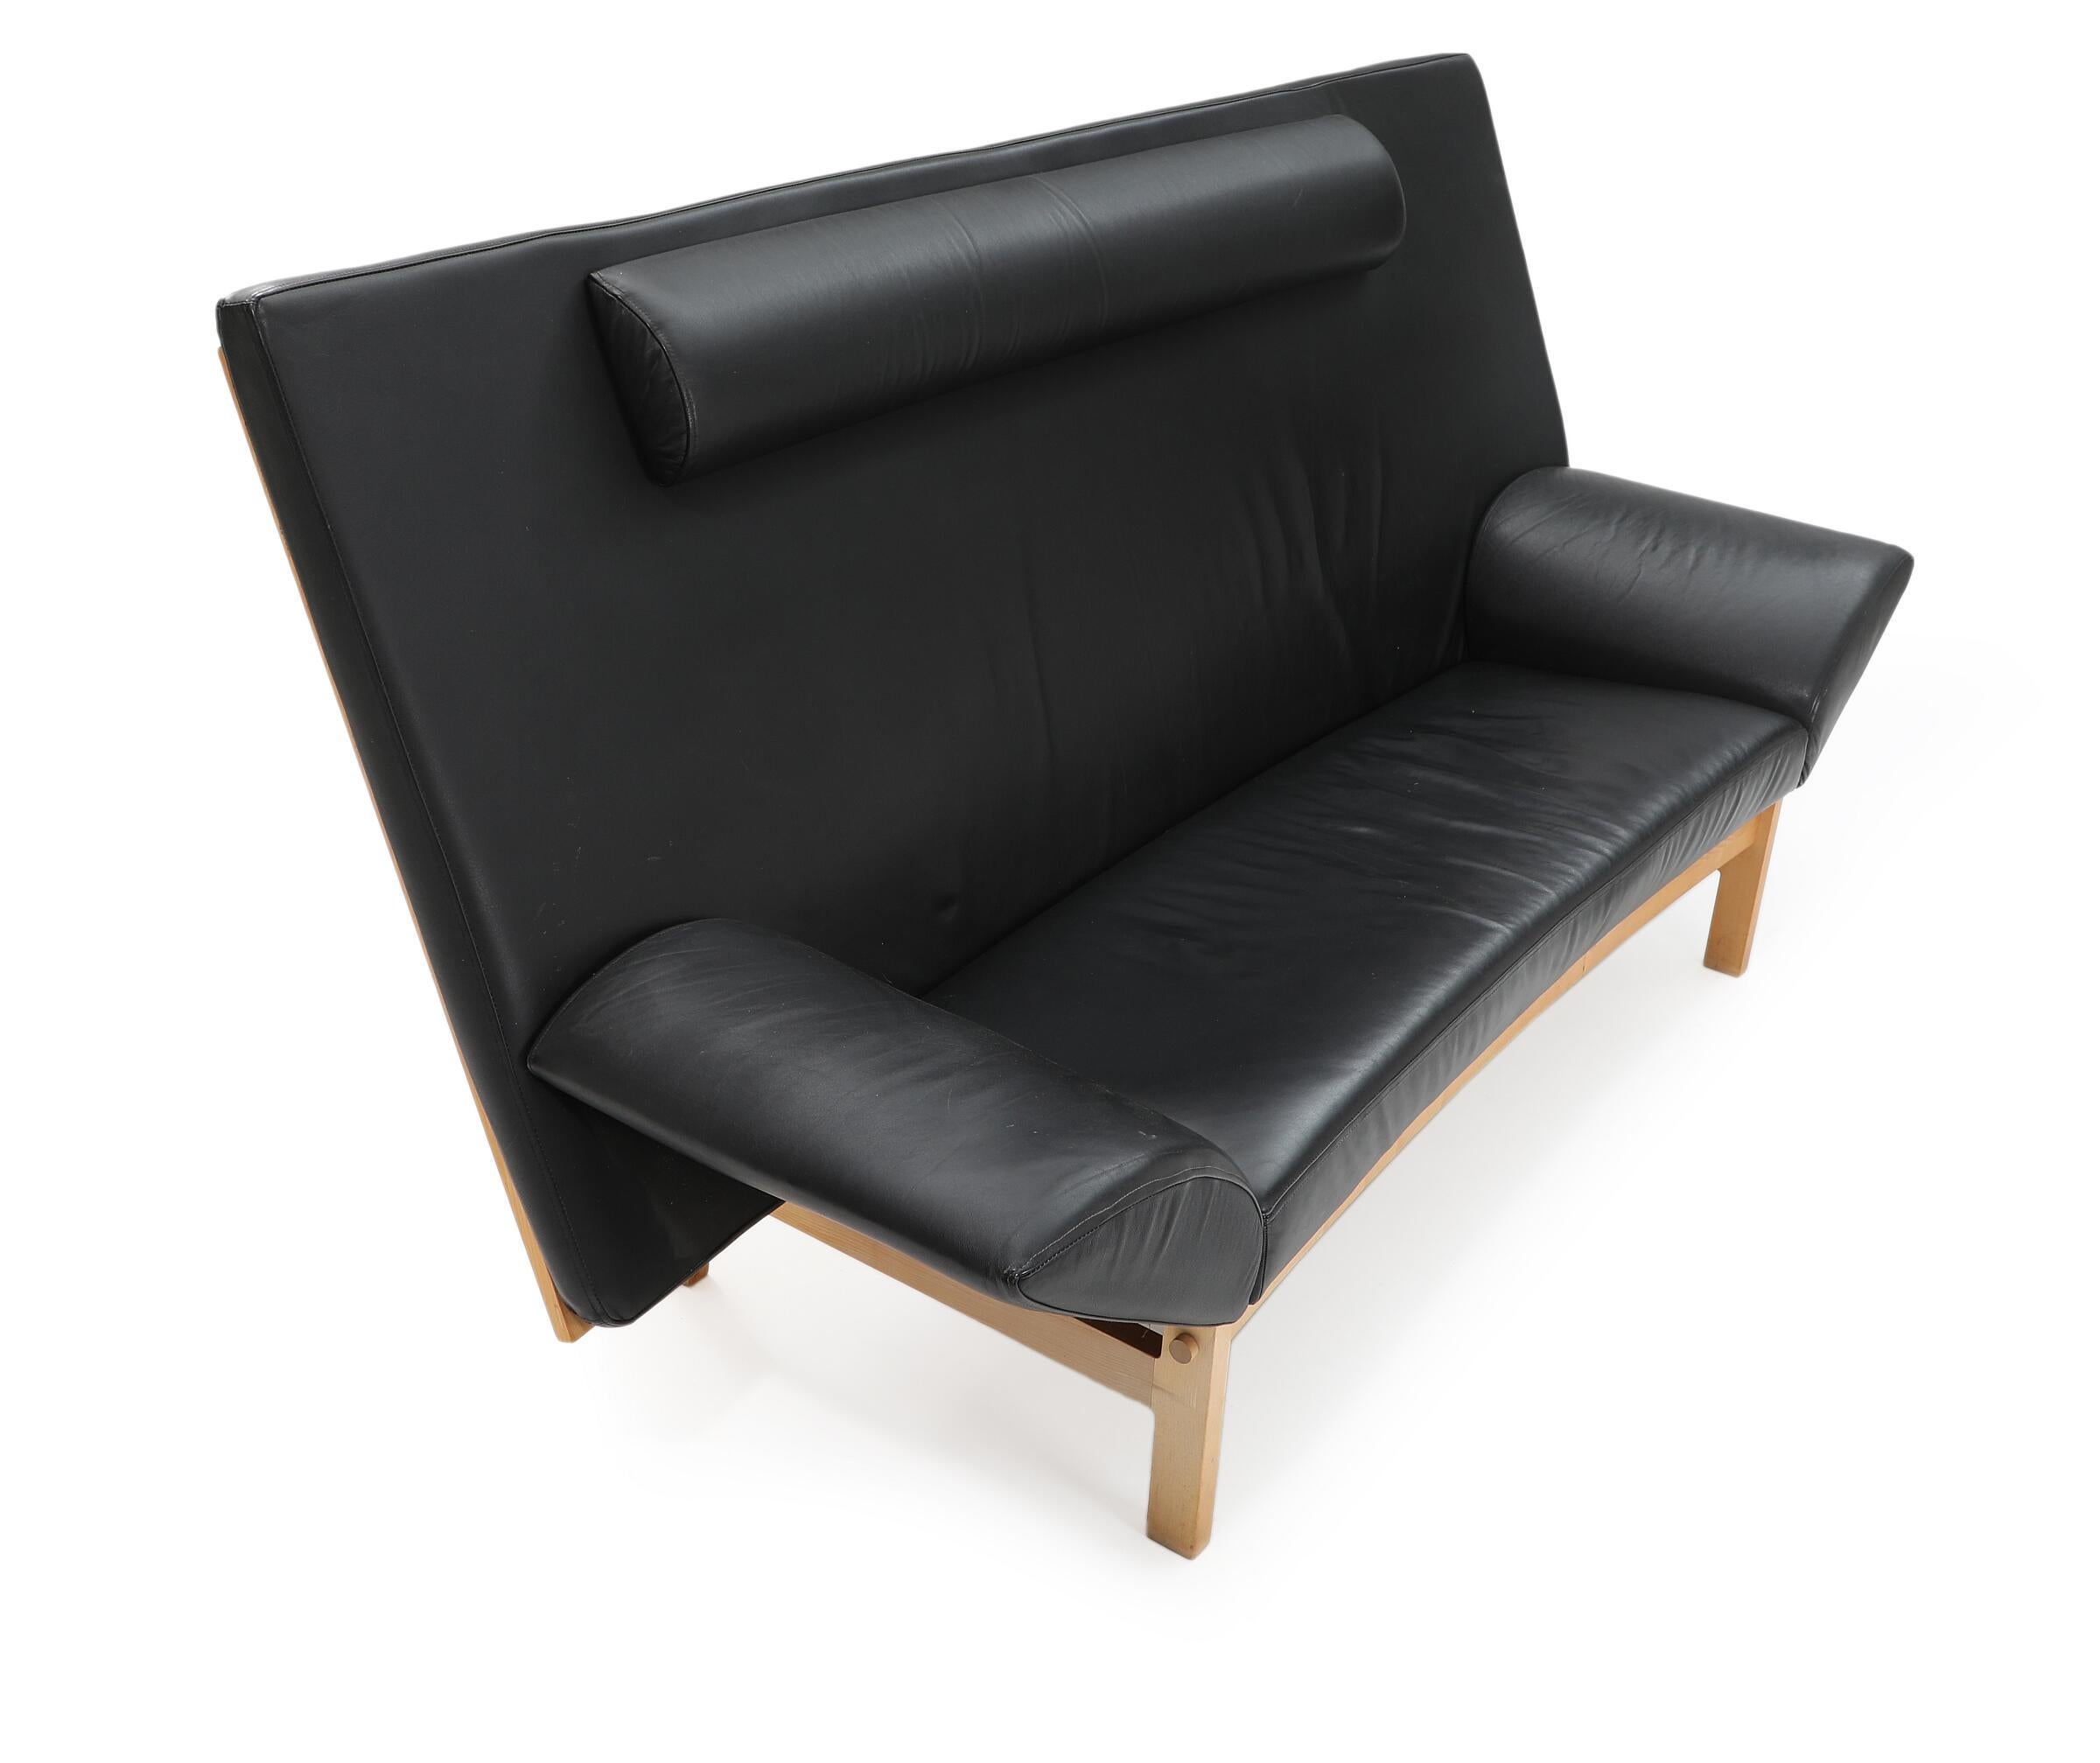 Three-seater sofa with maple frame, upholstered with black leather. Model GE 299. Manufactured and marked by Getama.